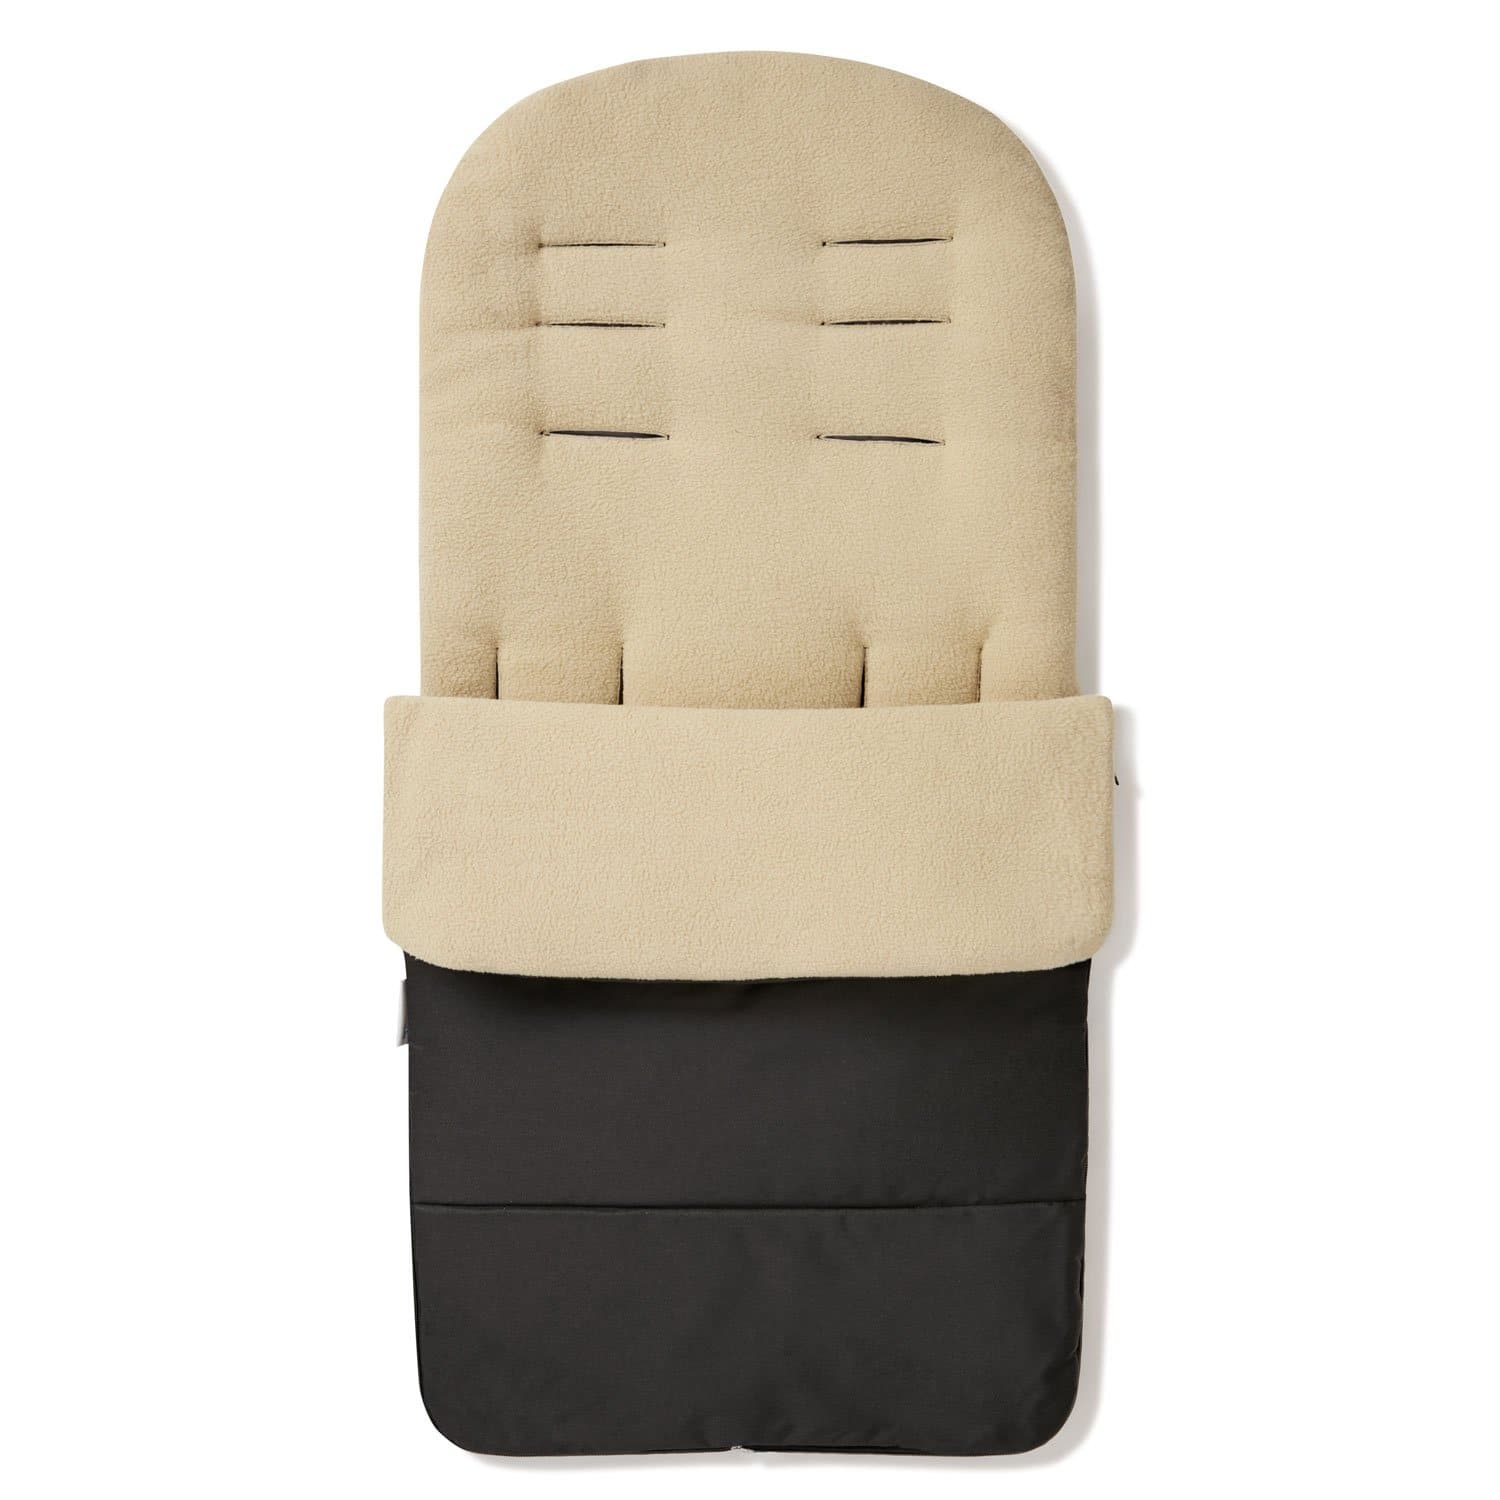 Premium Footmuff / Cosy Toes Compatible with Urban Detour - Desert Sand / Fits All Models | For Your Little One